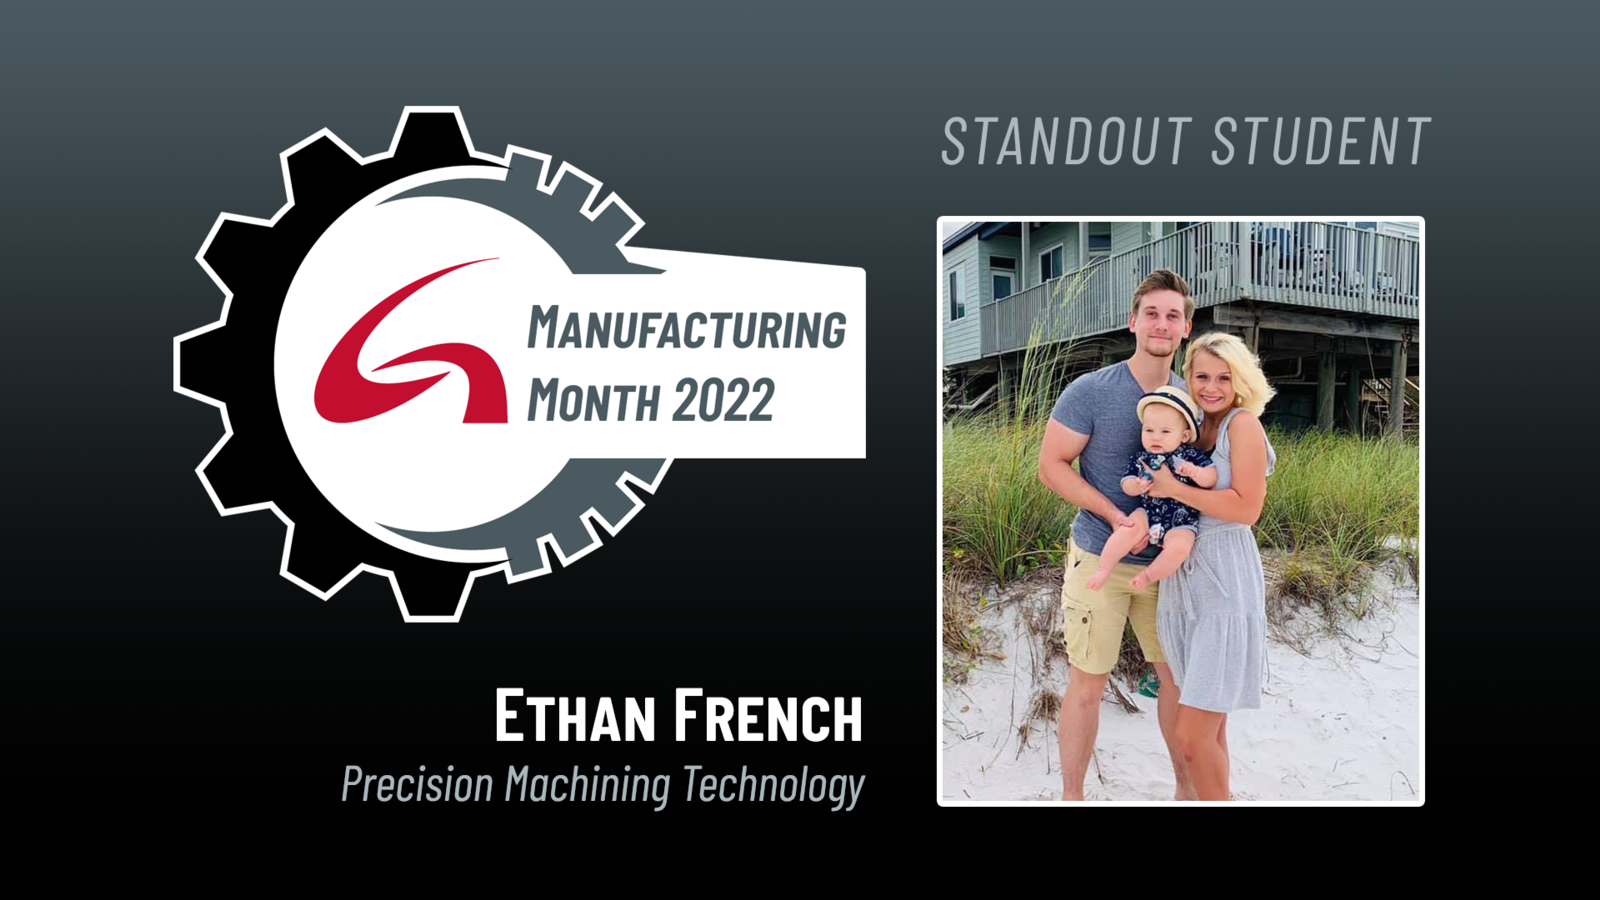 Manufacturing Month Standout Student Ethan French